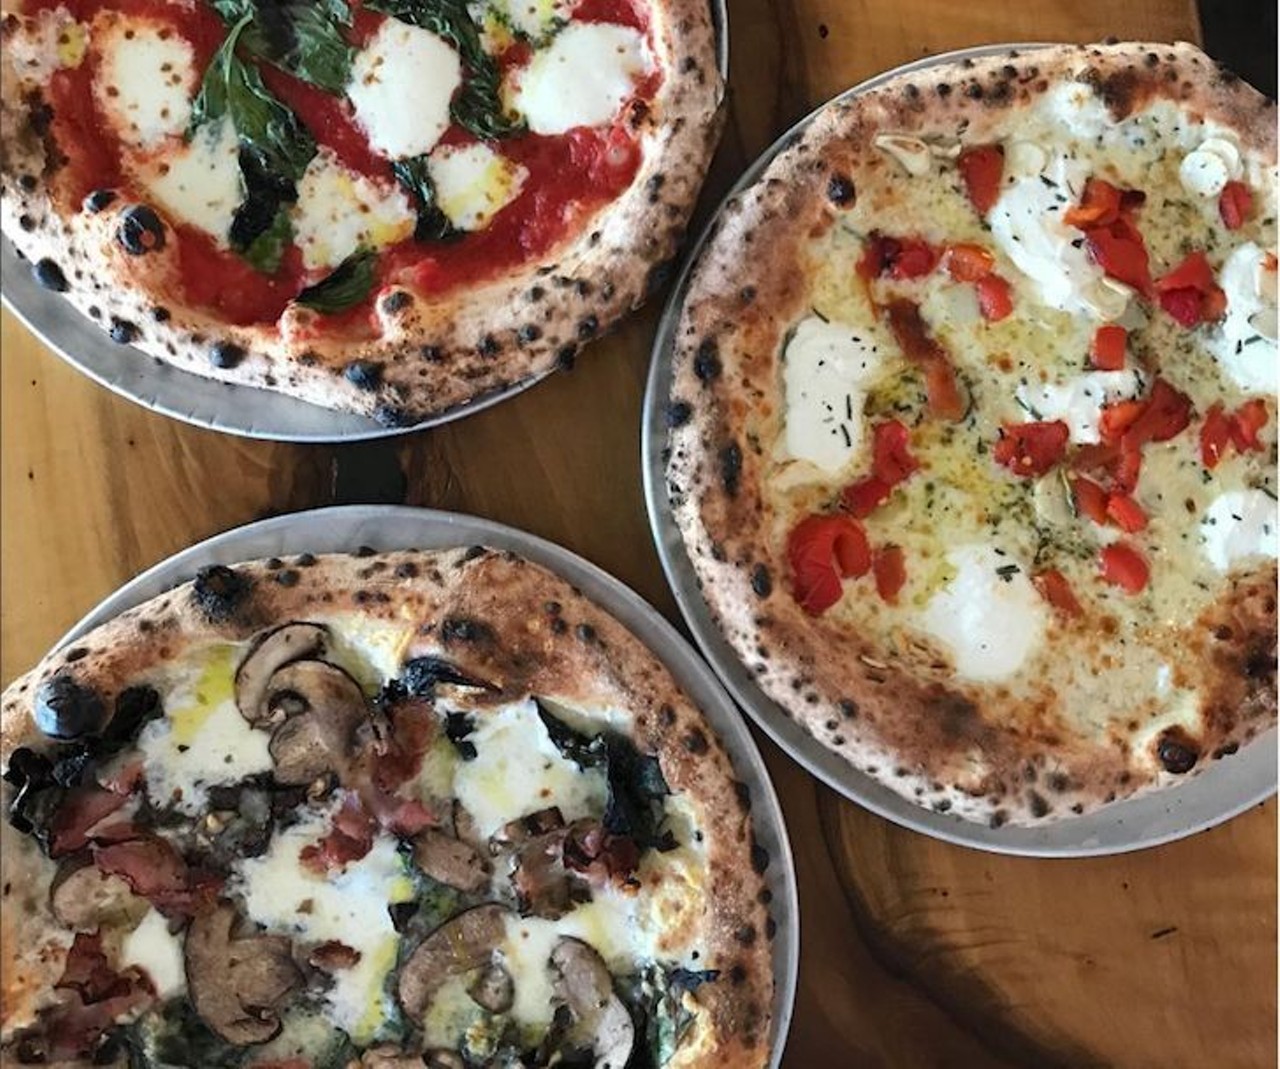 Pizza from Pizza Bruno 
3990 Curry Ford Road 
There are a lot of pizza joints in the city, but no one offers wood-fire Neapolitan style pies like Pizza Bruno. With a variety of toppings, their crunchy, cheesy slices are worth a visit. 
Photo via Pizza Bruno/Instagram